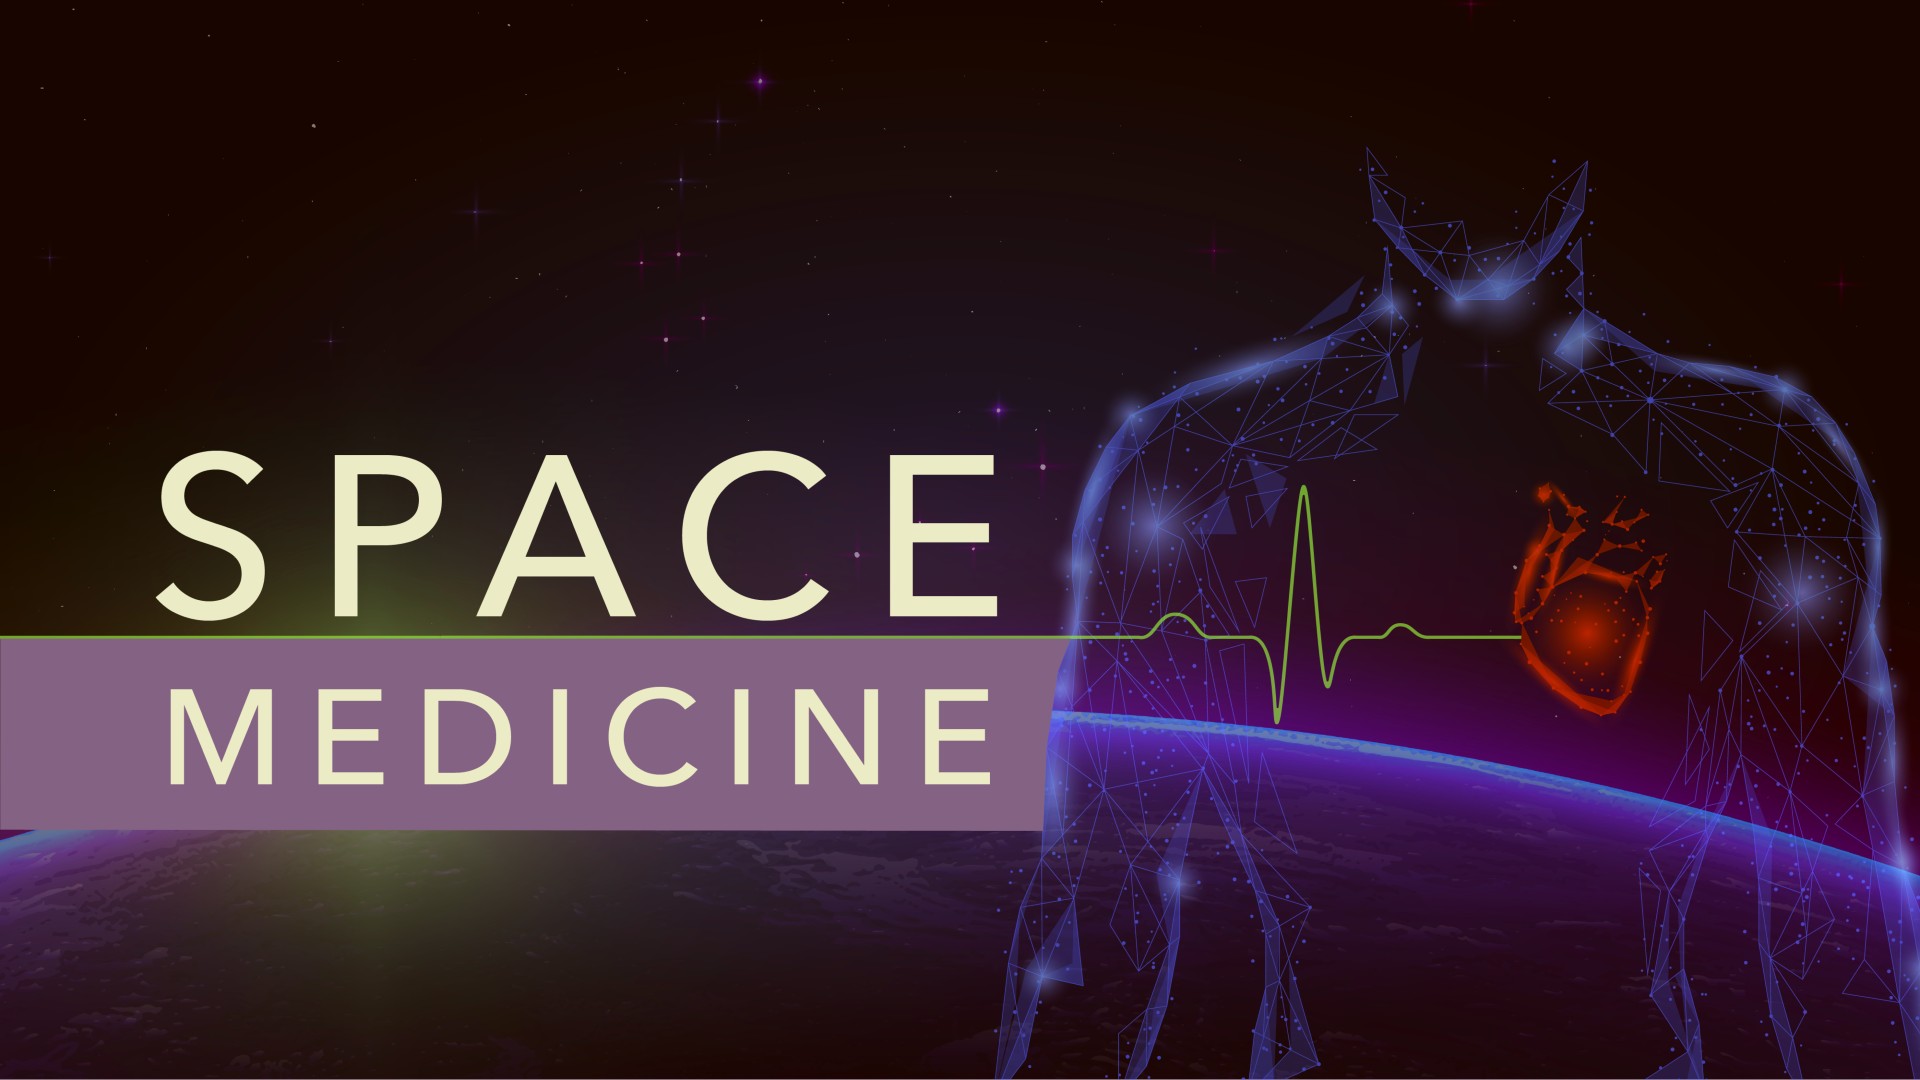 Extraterrestrial Health: The Meaning of Medicine in Space